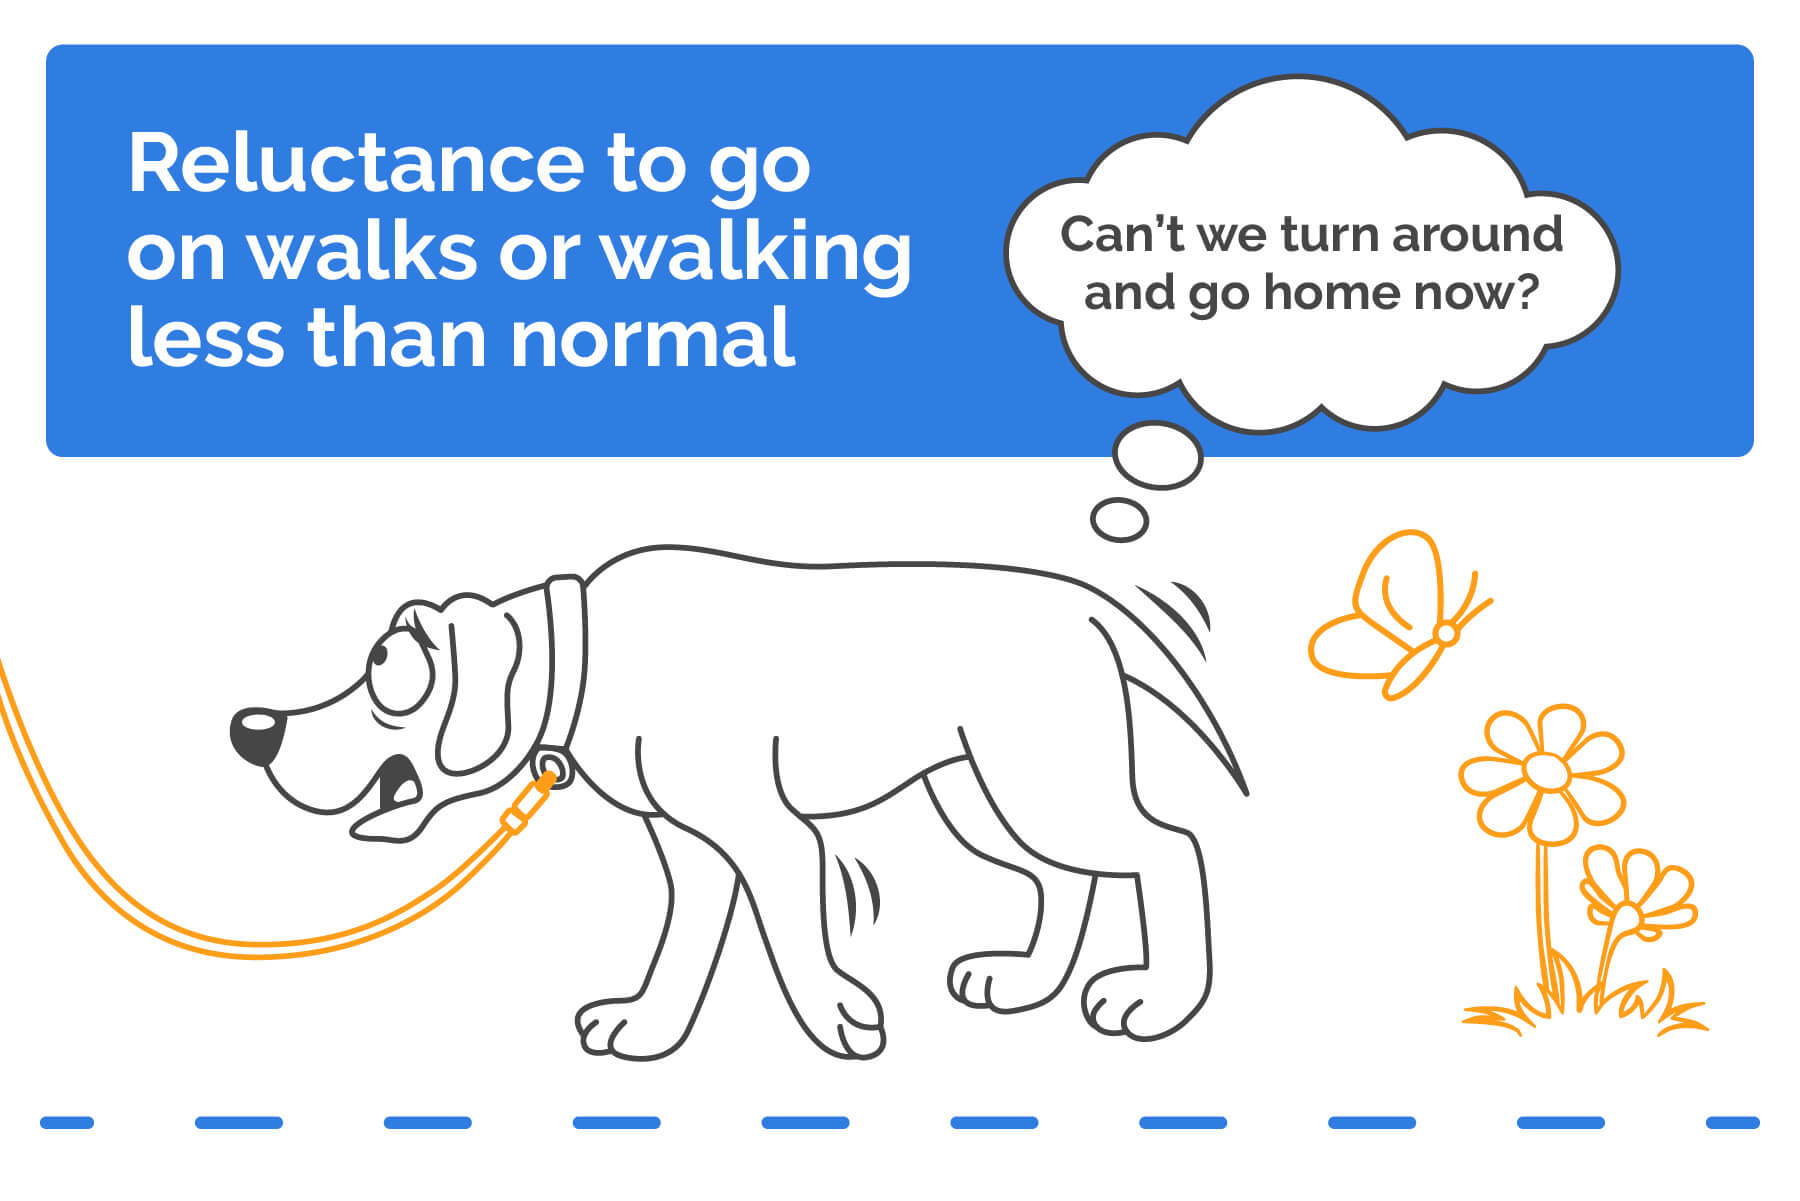 How to Tell if Your Dog Is in Pain: 12 Signs